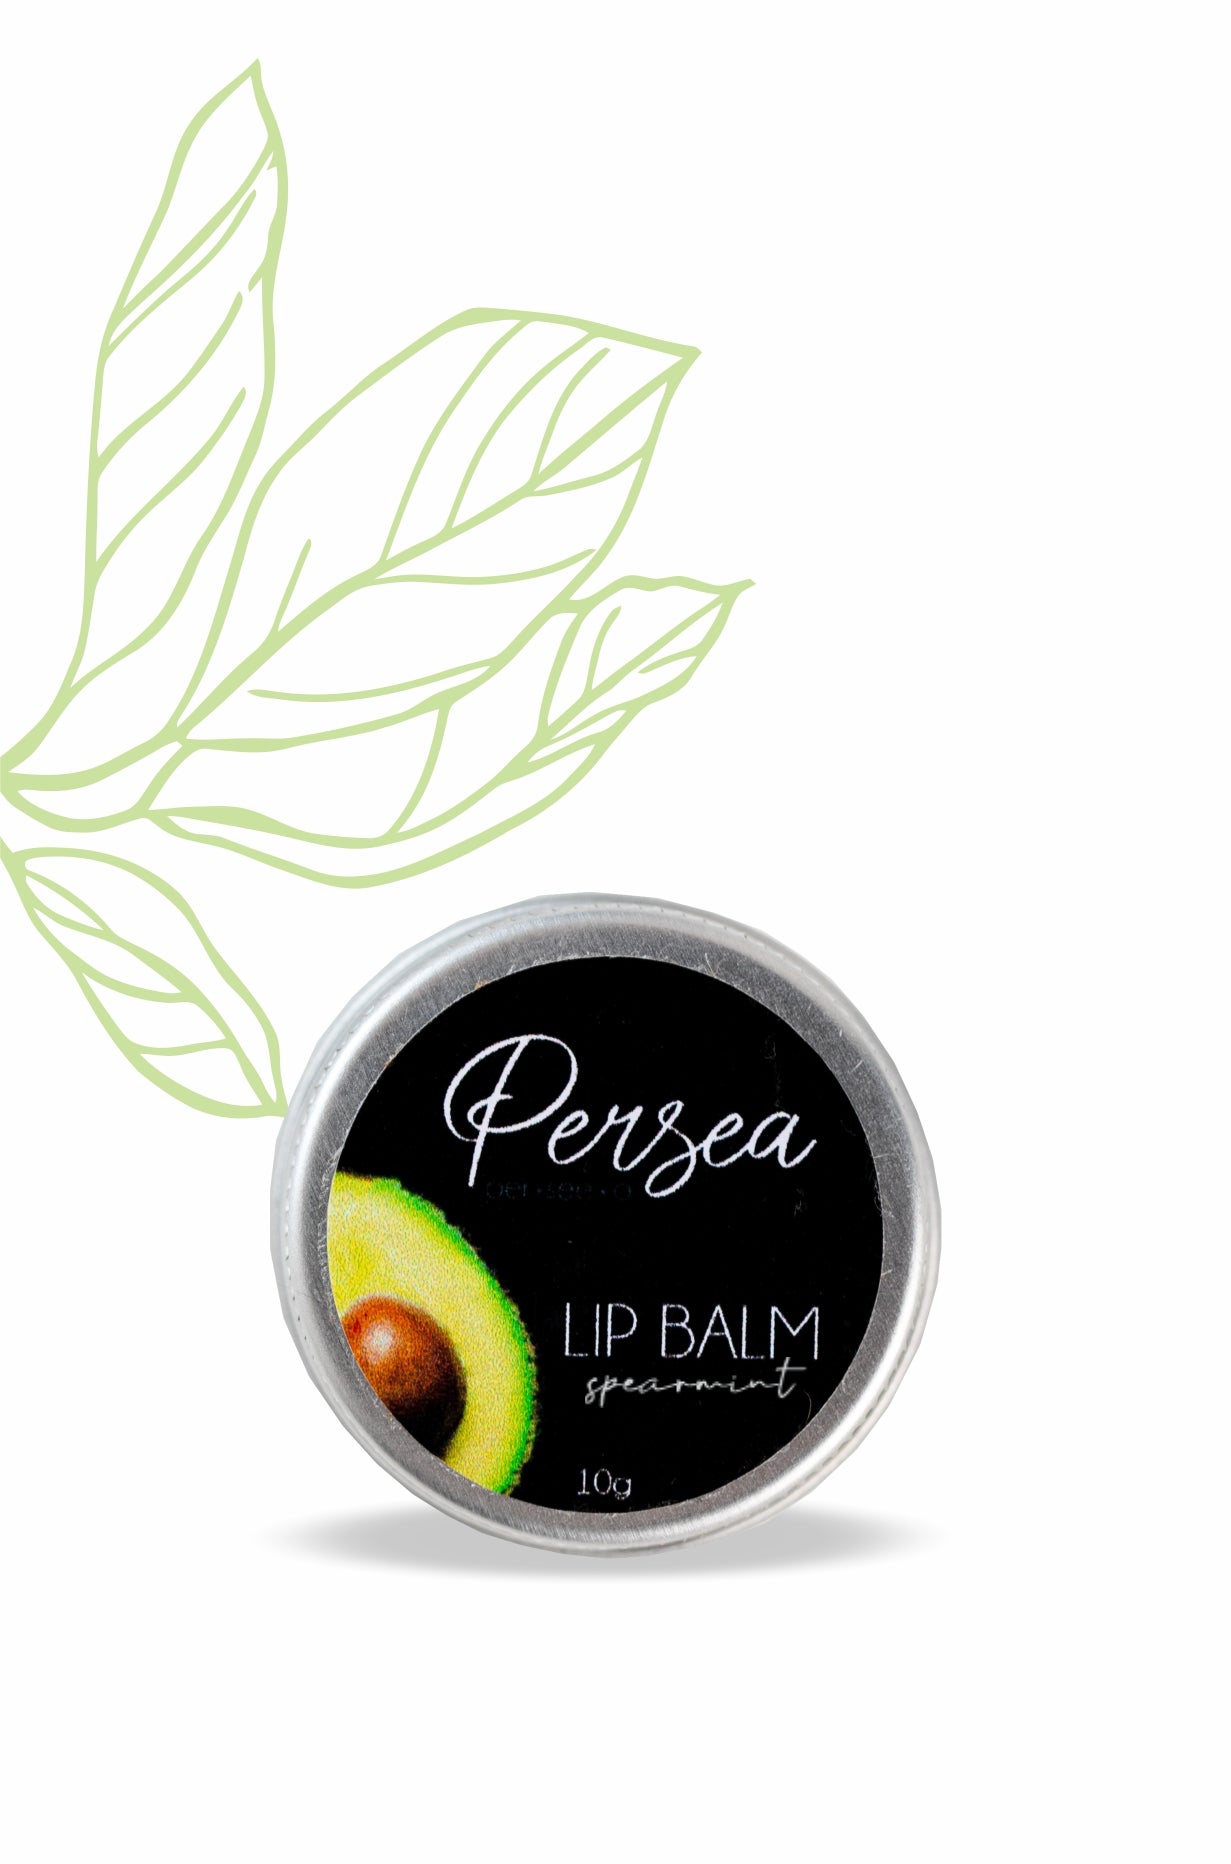 Persea Avo Lip Balm. Moisturises your lips for hours! Spearmint Scented. All natural!